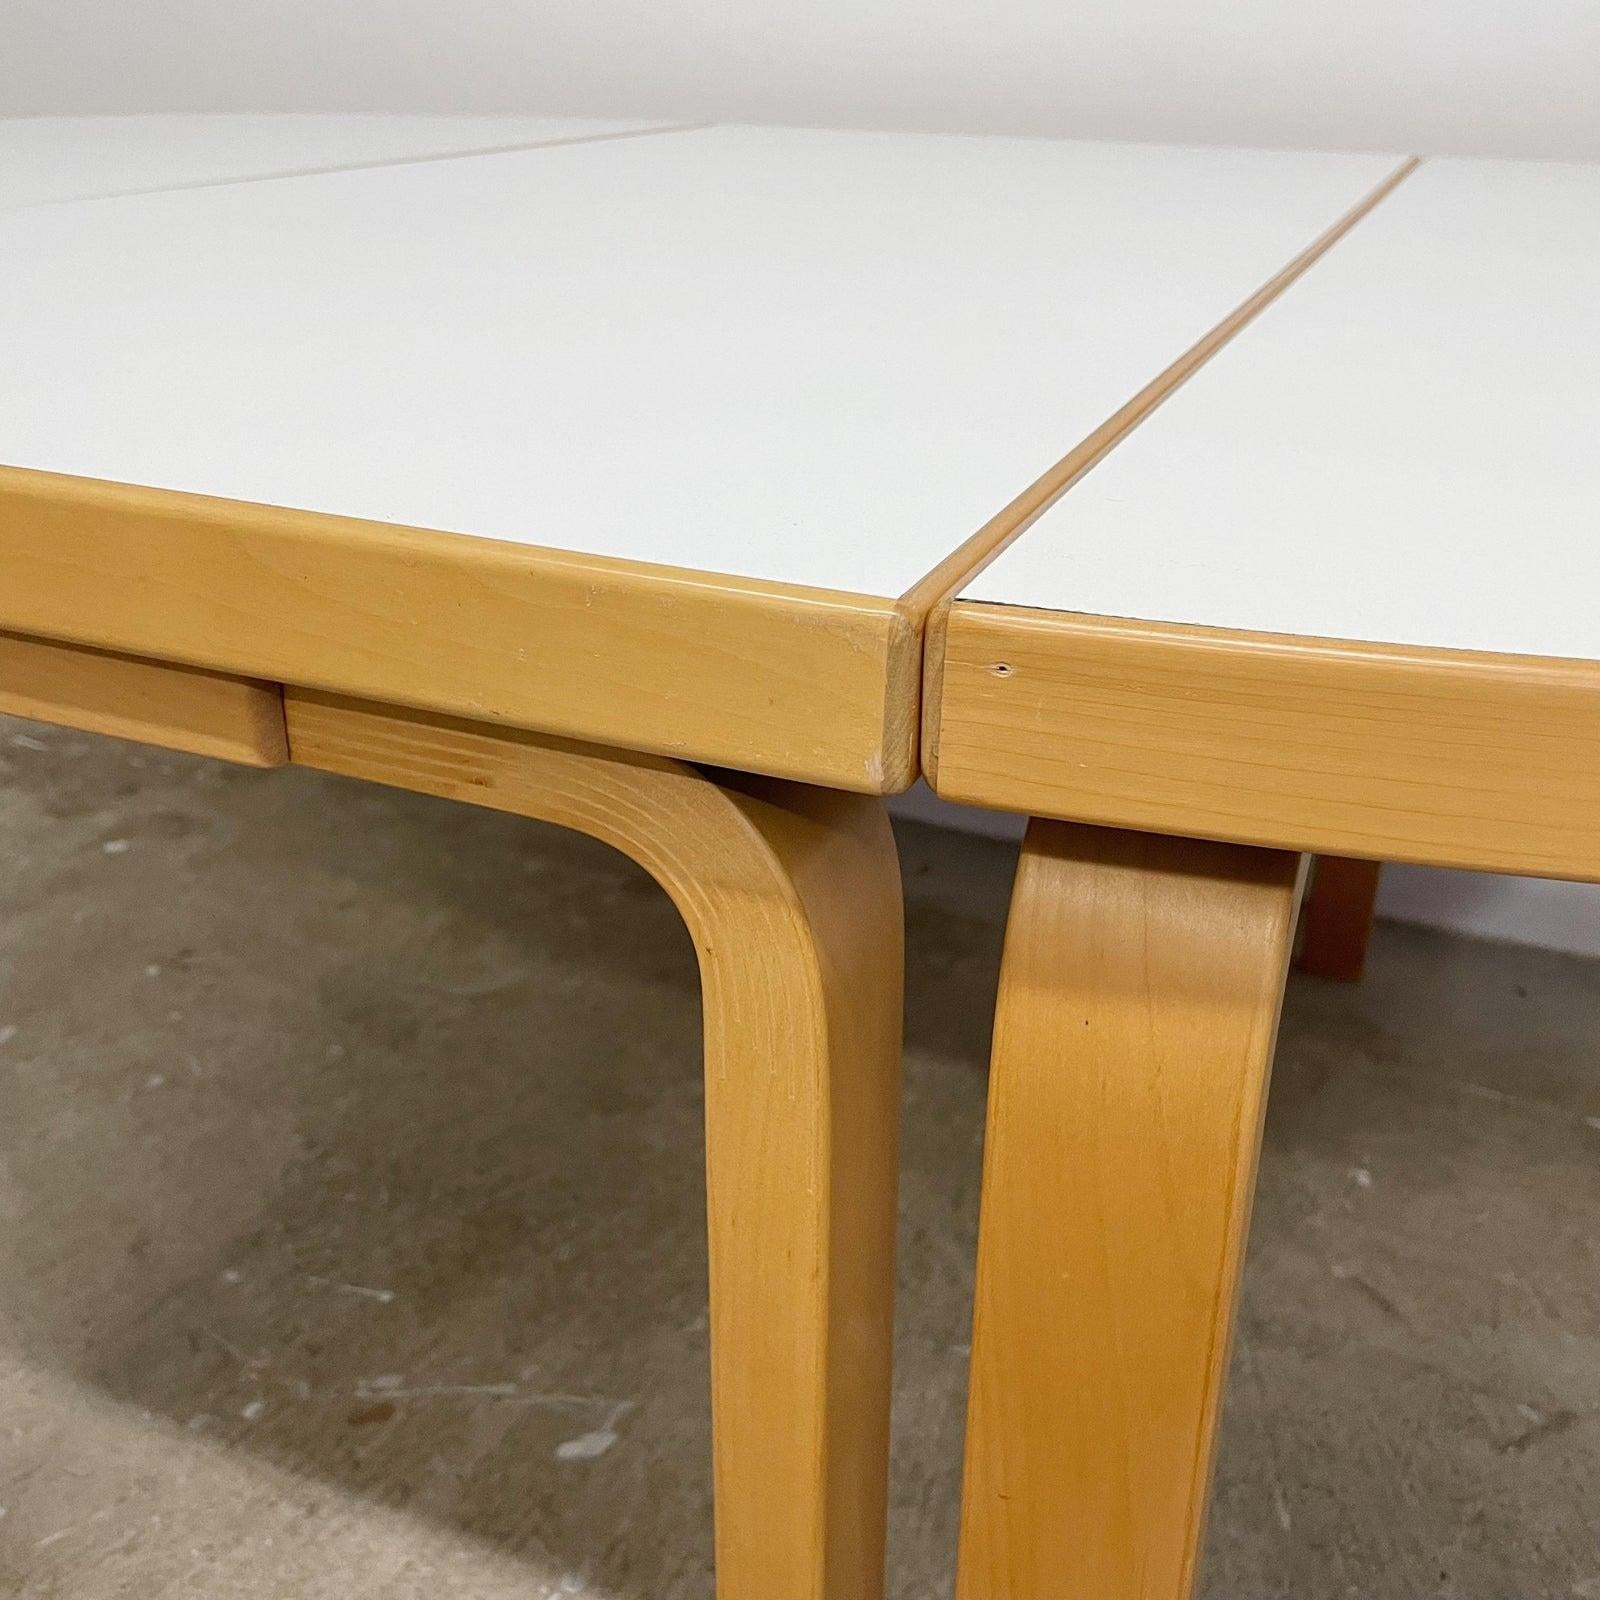 Hand-Crafted 4 PieceModular Conference Dining Table by Thygesen & Sorensen for Magnus Olesen